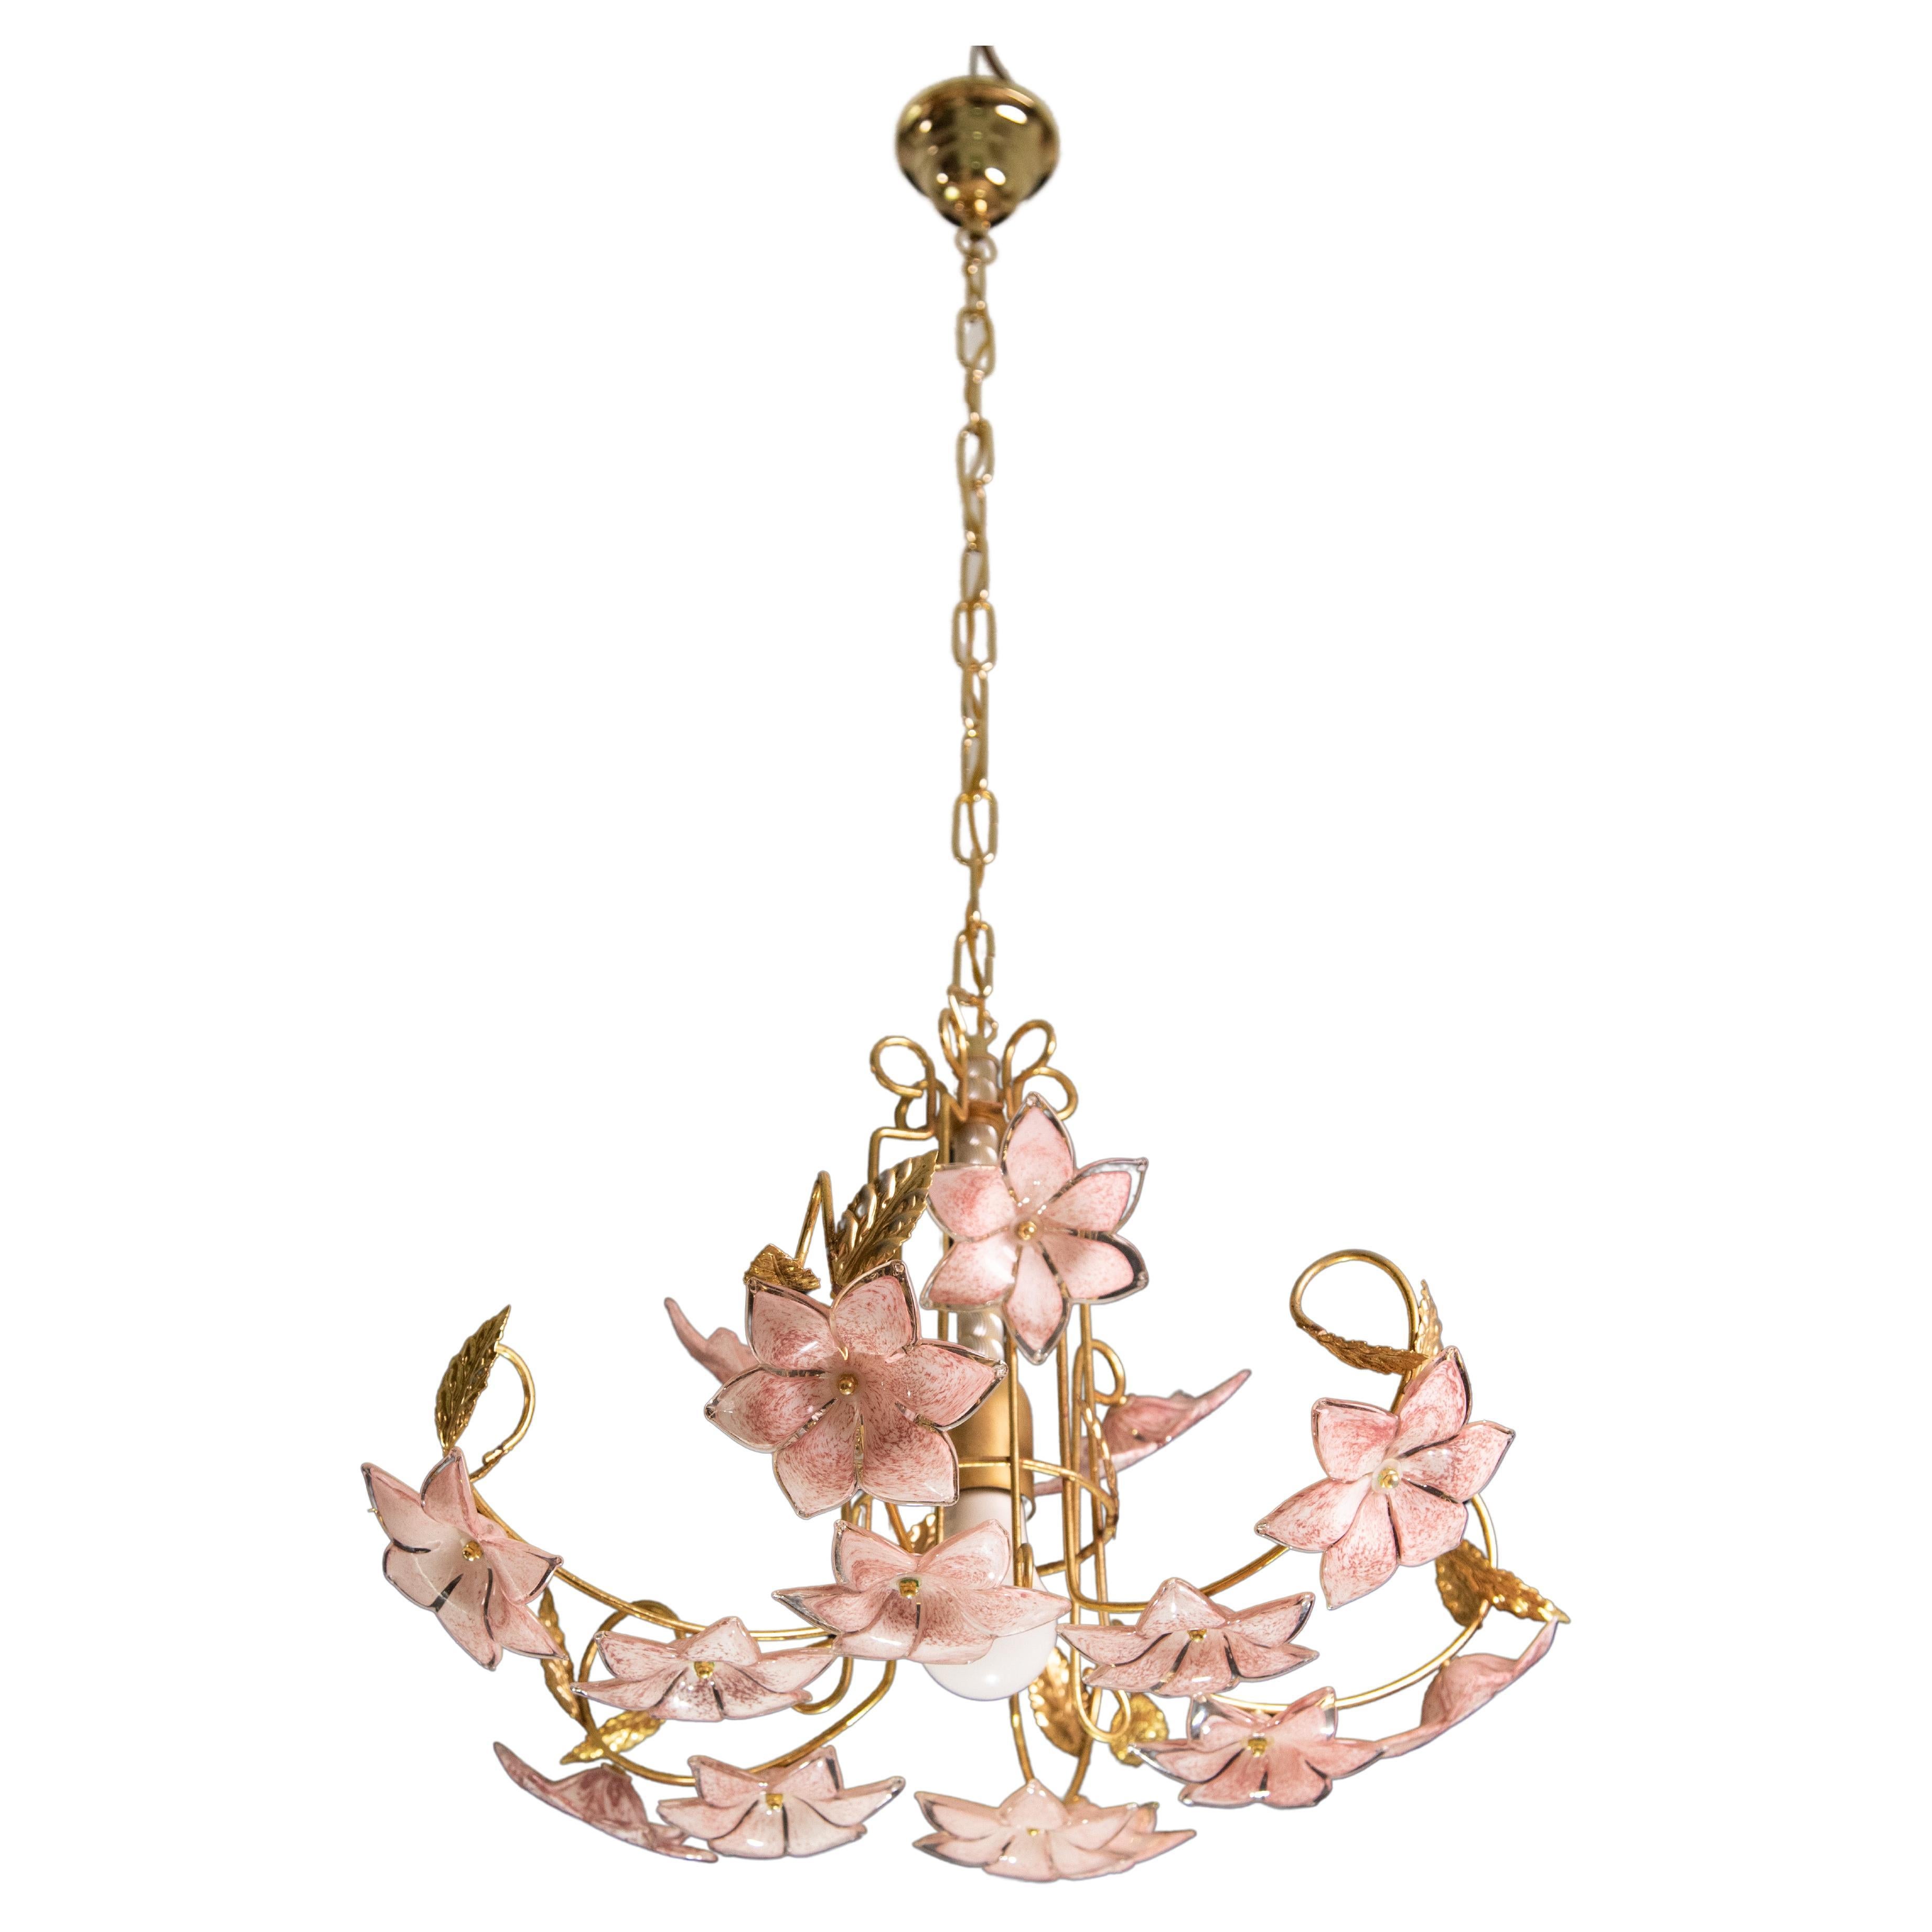 Vintage Murano glass chandelier with pink flowers.
The chandelier has 1 light point with E27 socket.
The frame is made of gold bath and has some signs of time.
The height of the chandelier is 95 cm, the diameter is 55 cm, the height without chain